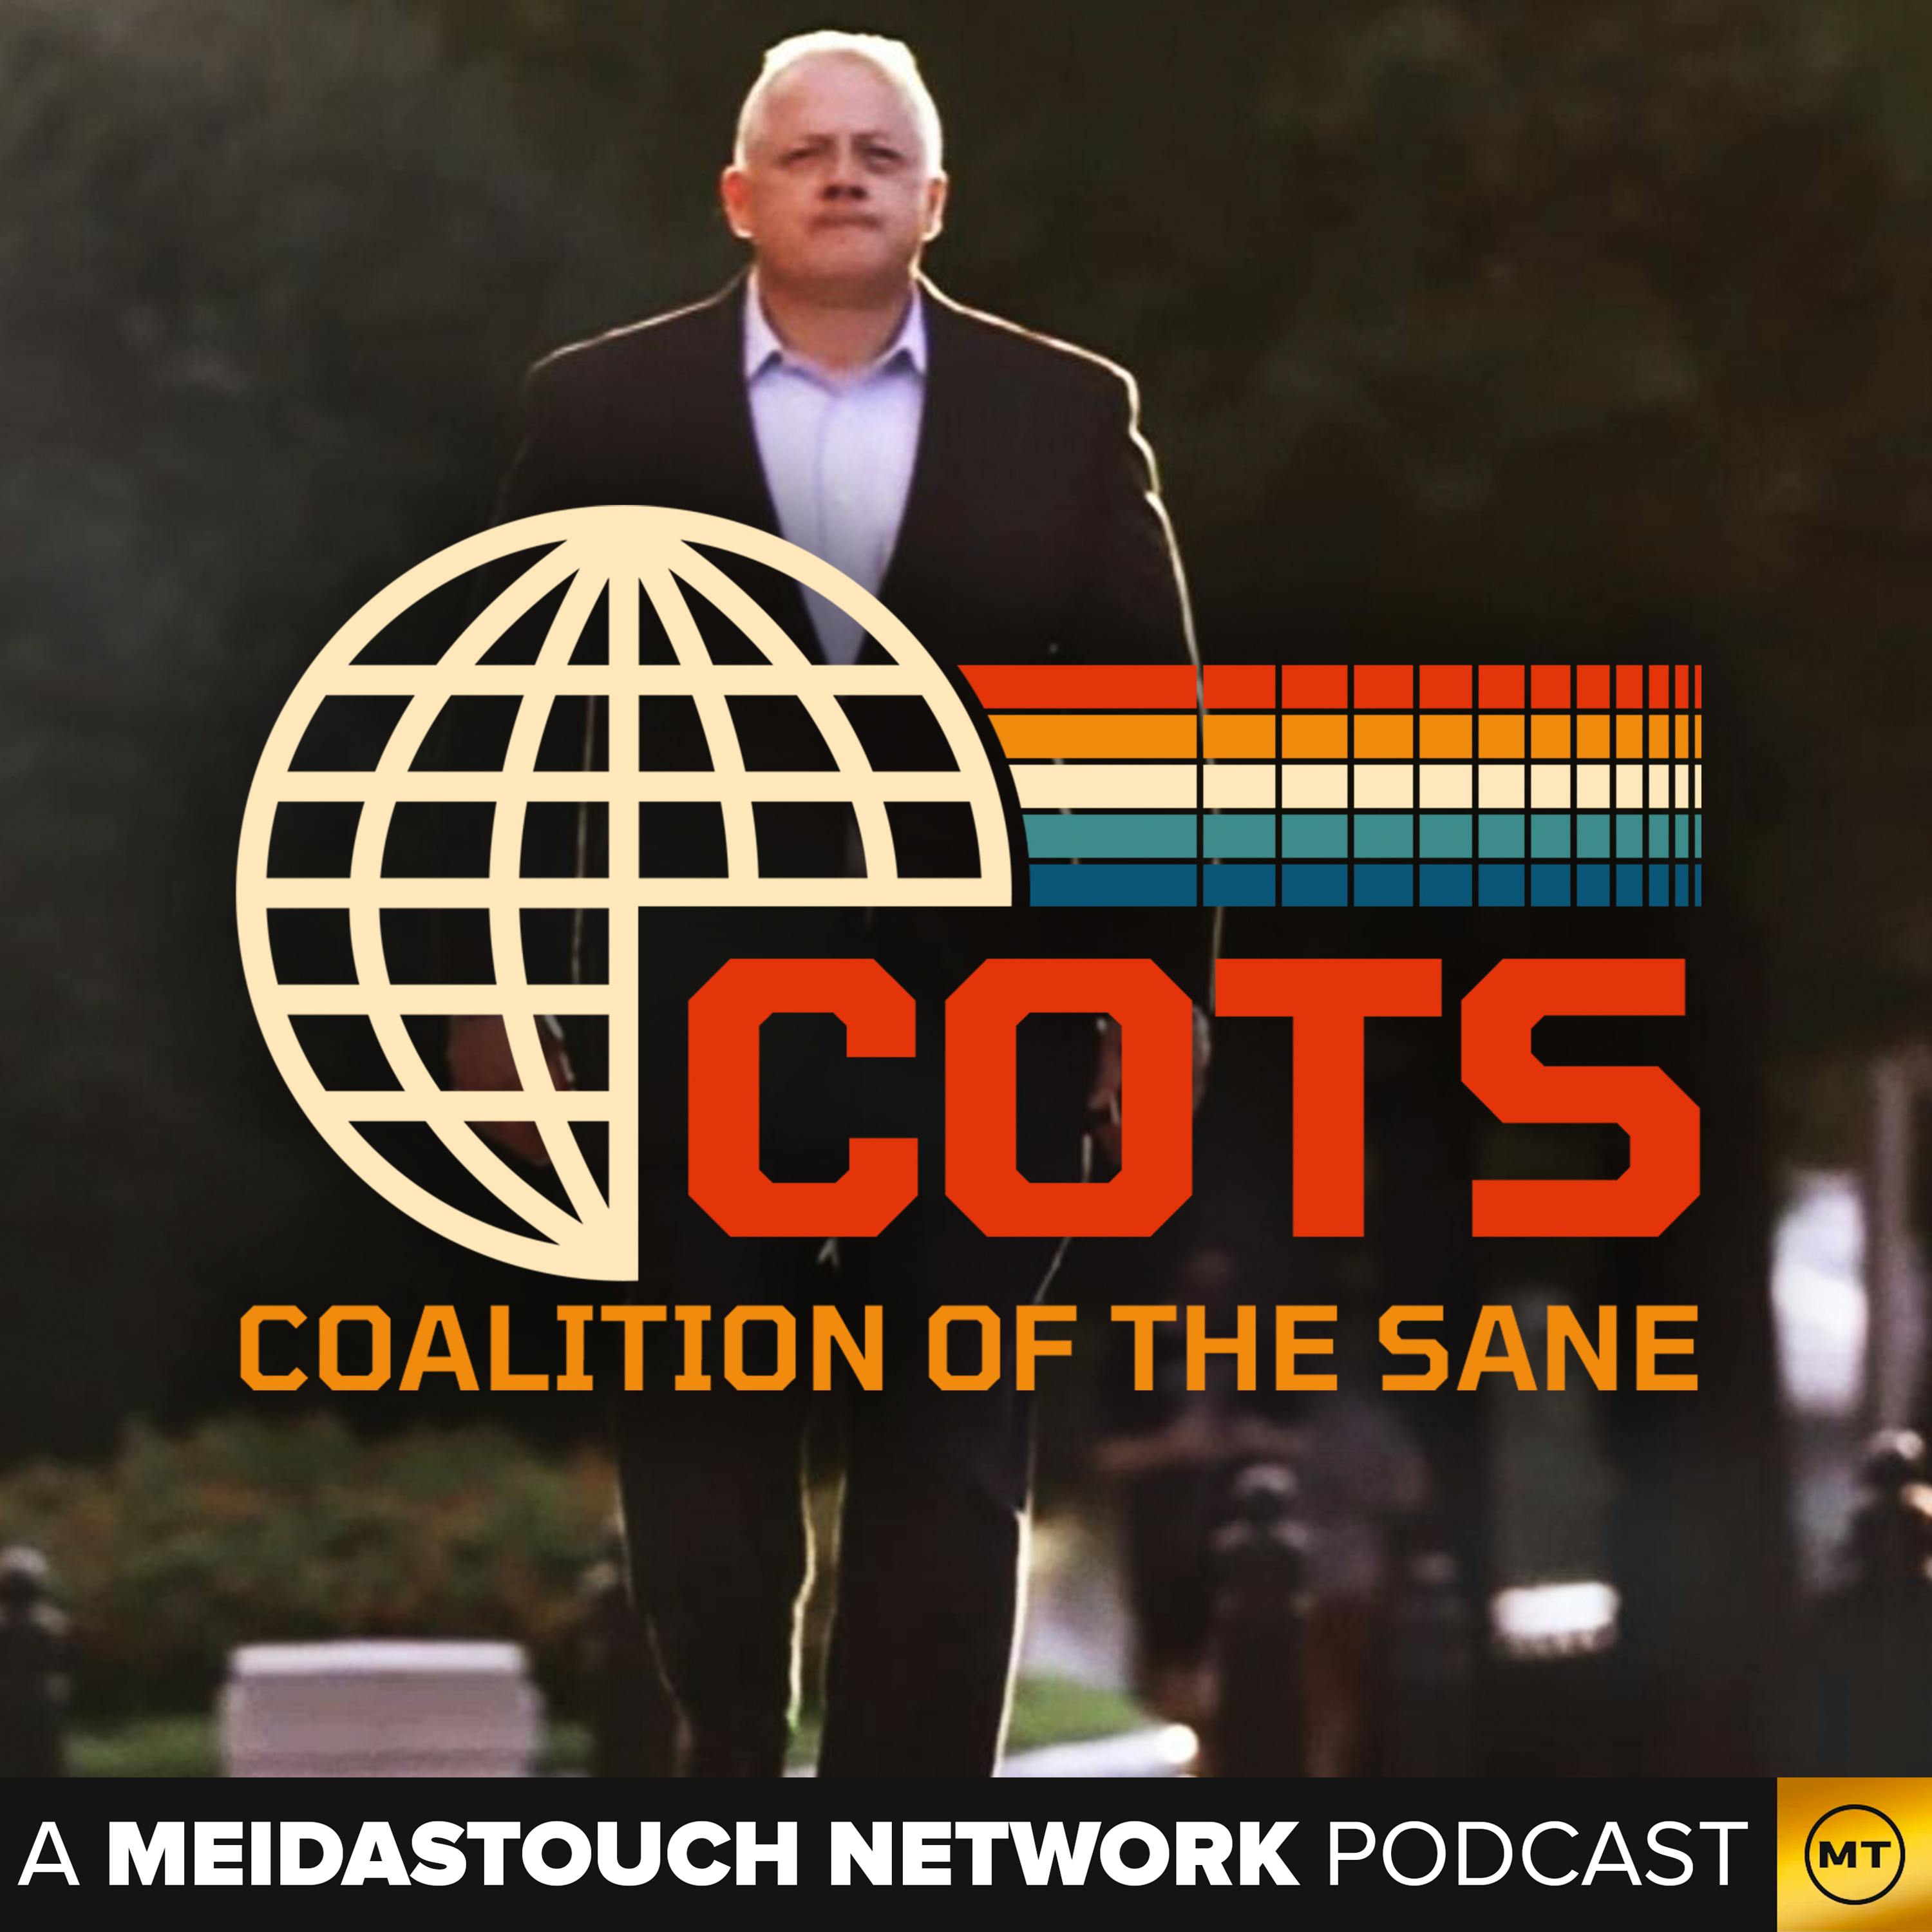 Coalition of the Sane by MeidasTouch Network